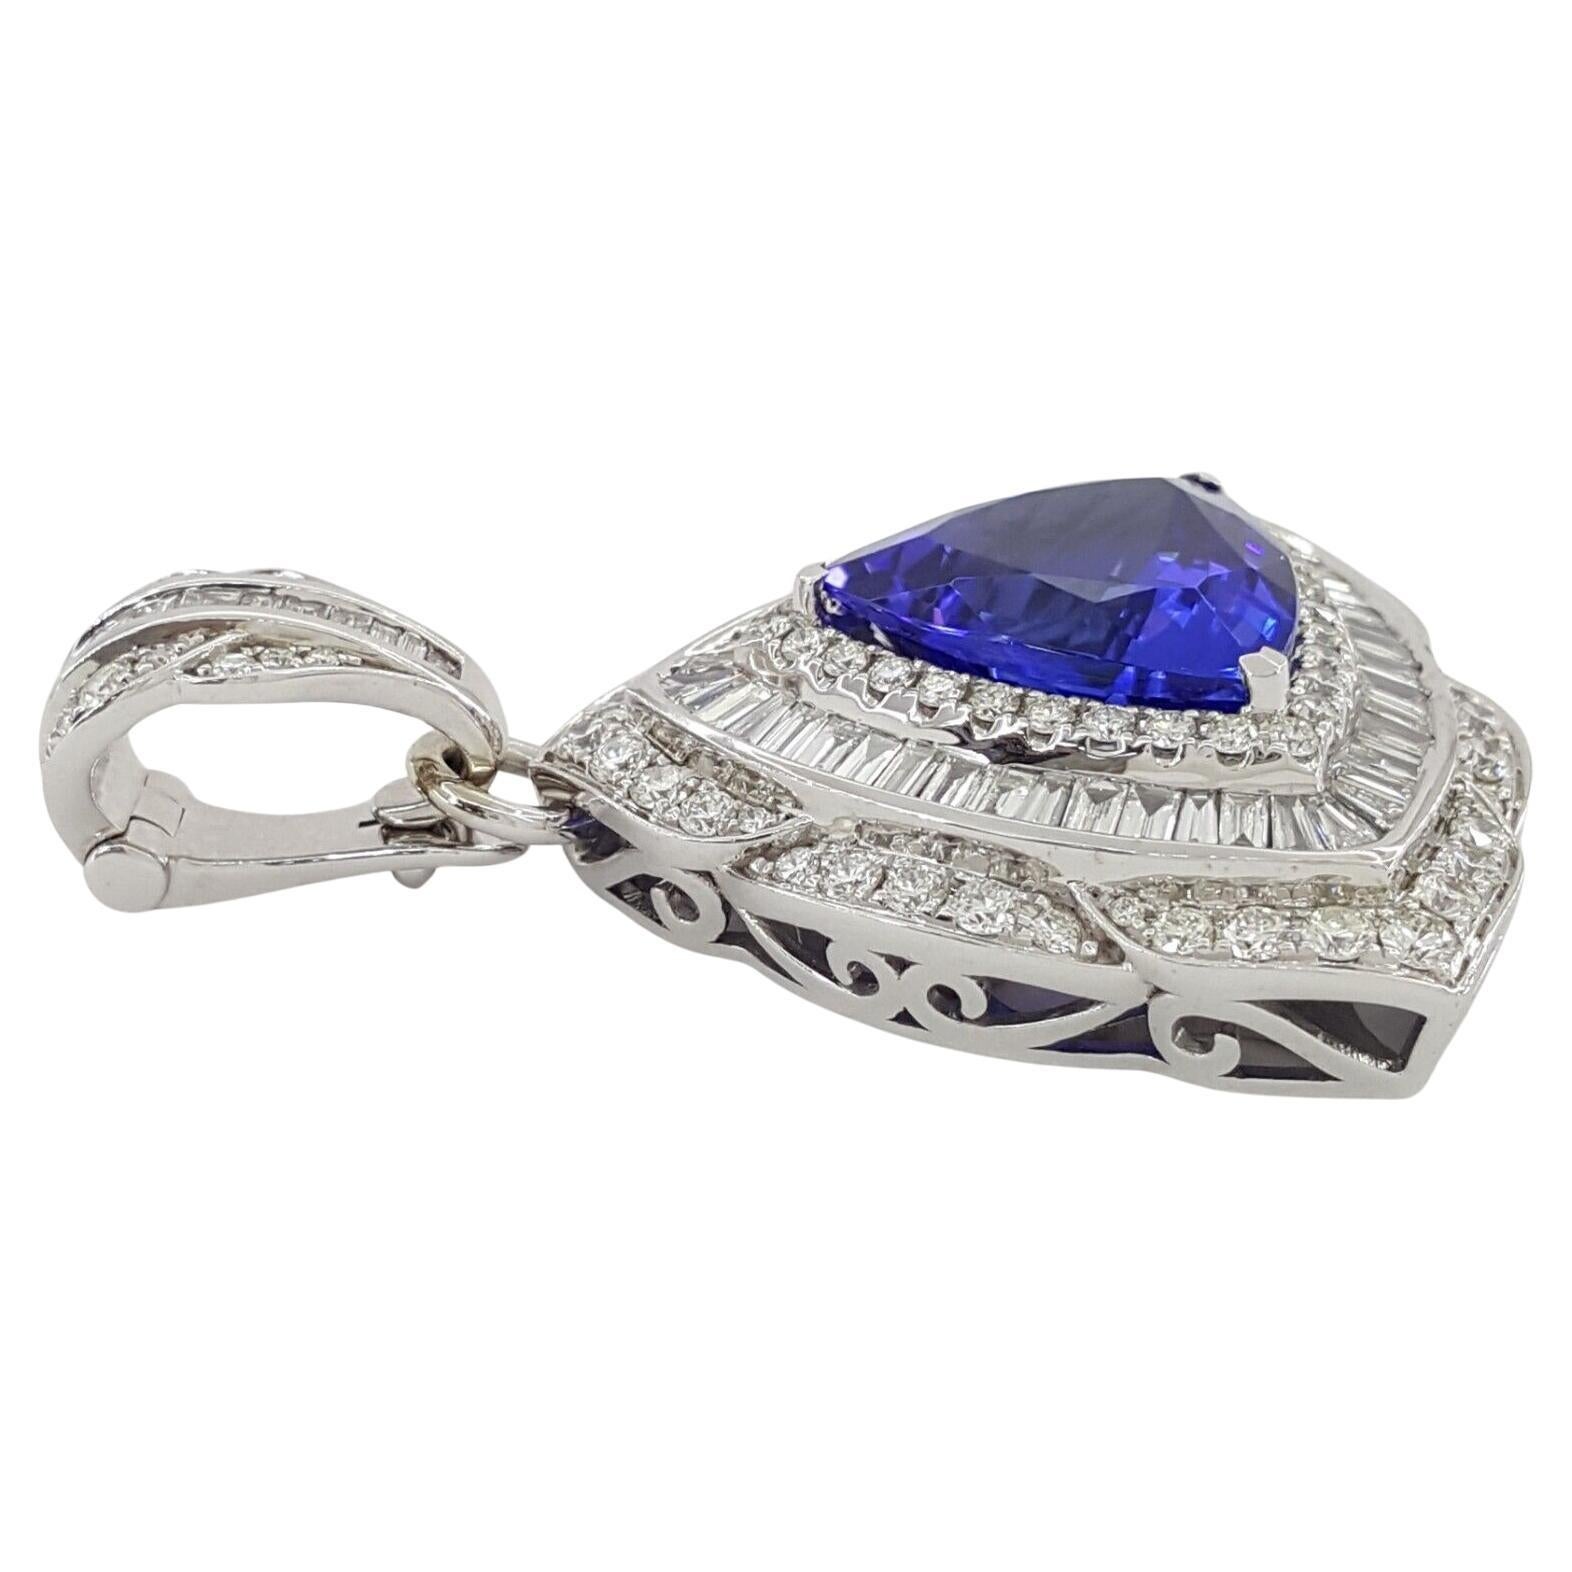 Behold the exquisite allure of the 16.52 ct Total Weight Trillion Cut Tanzanite Pendant, adorned with a mesmerizing halo of Round and Baguette Cut Diamonds, all set in 14K White Gold. This resplendent piece is a harmonious fusion of sophistication,